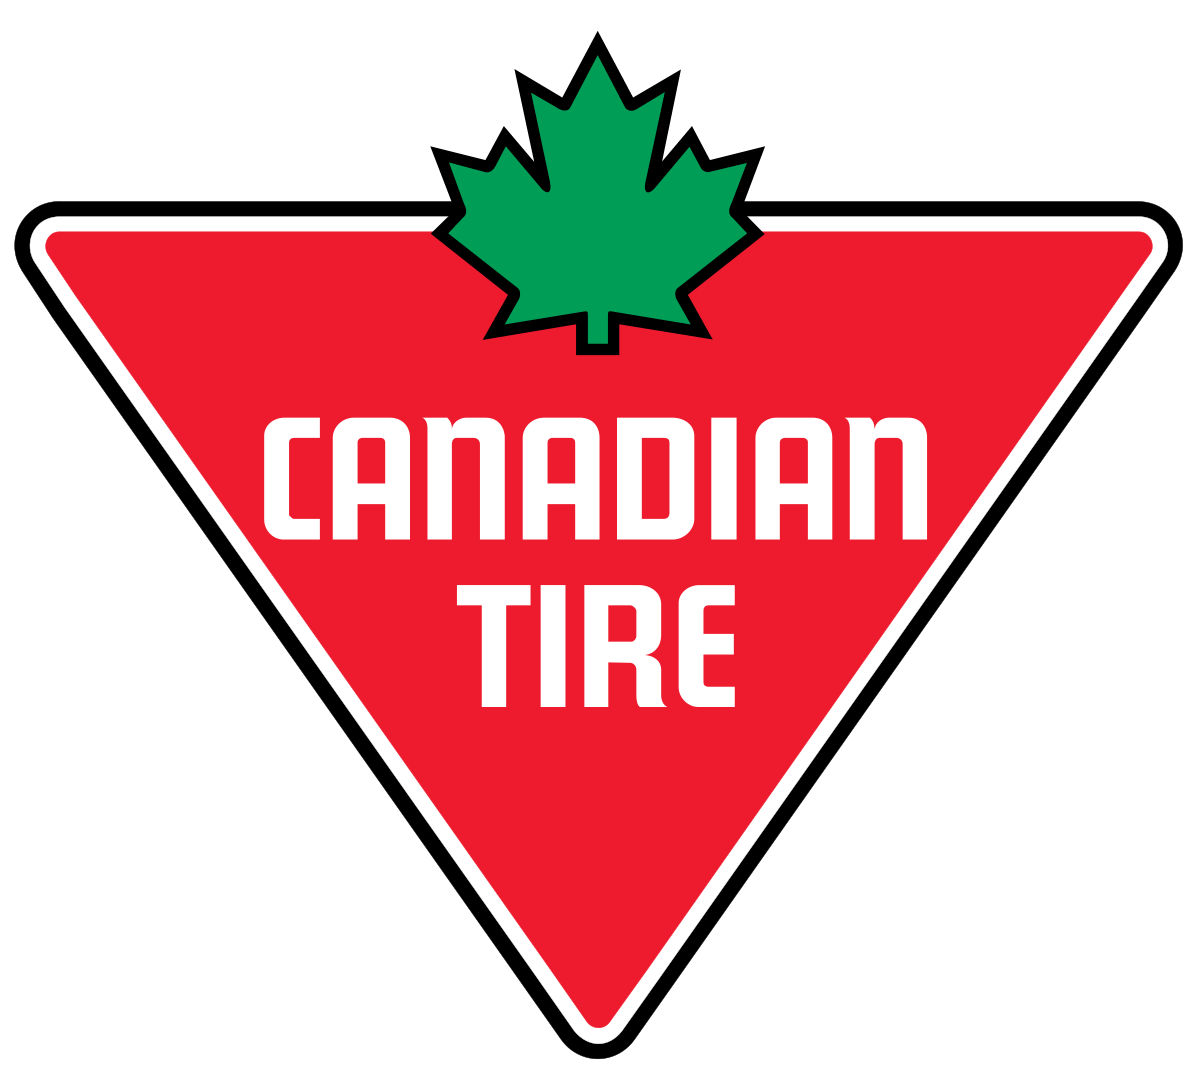 Red Maple Leaf Company Logo - Canadian Tire